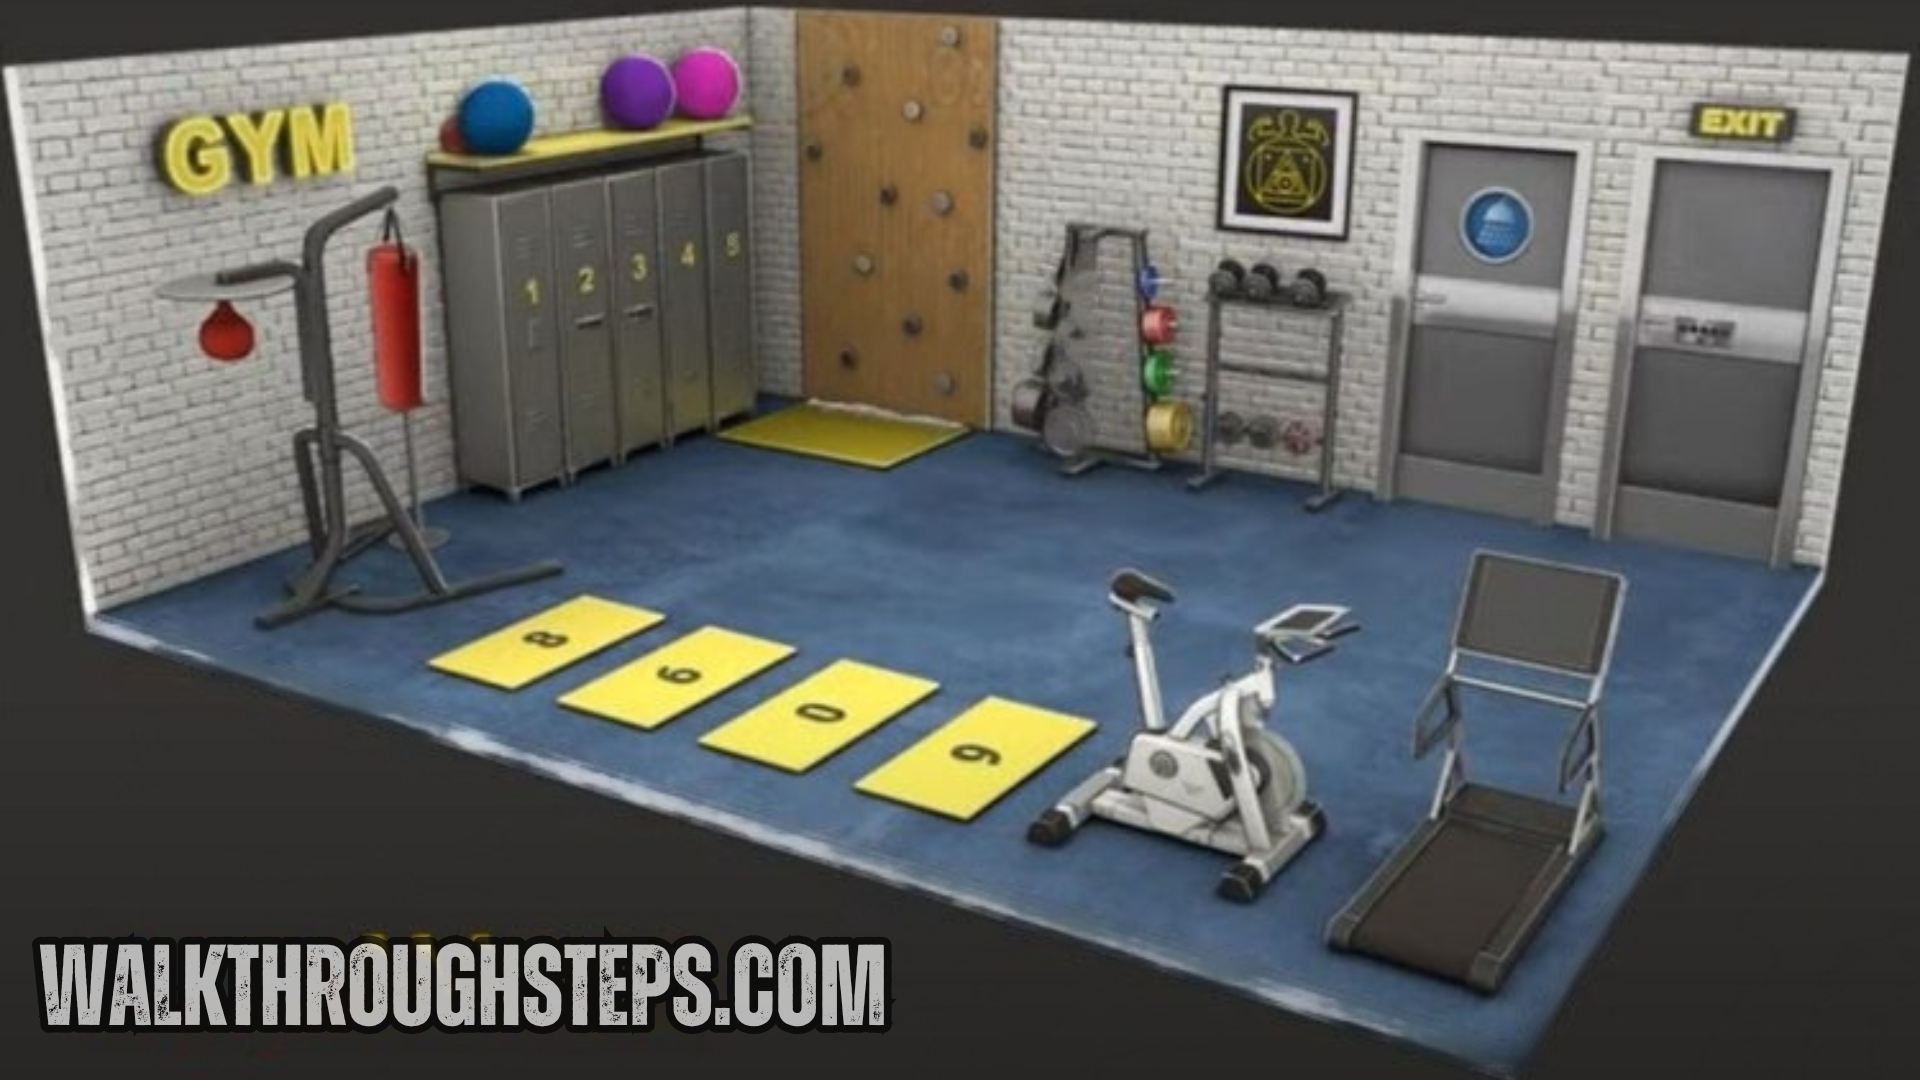 Rooms And Exits Gym Walkthrough